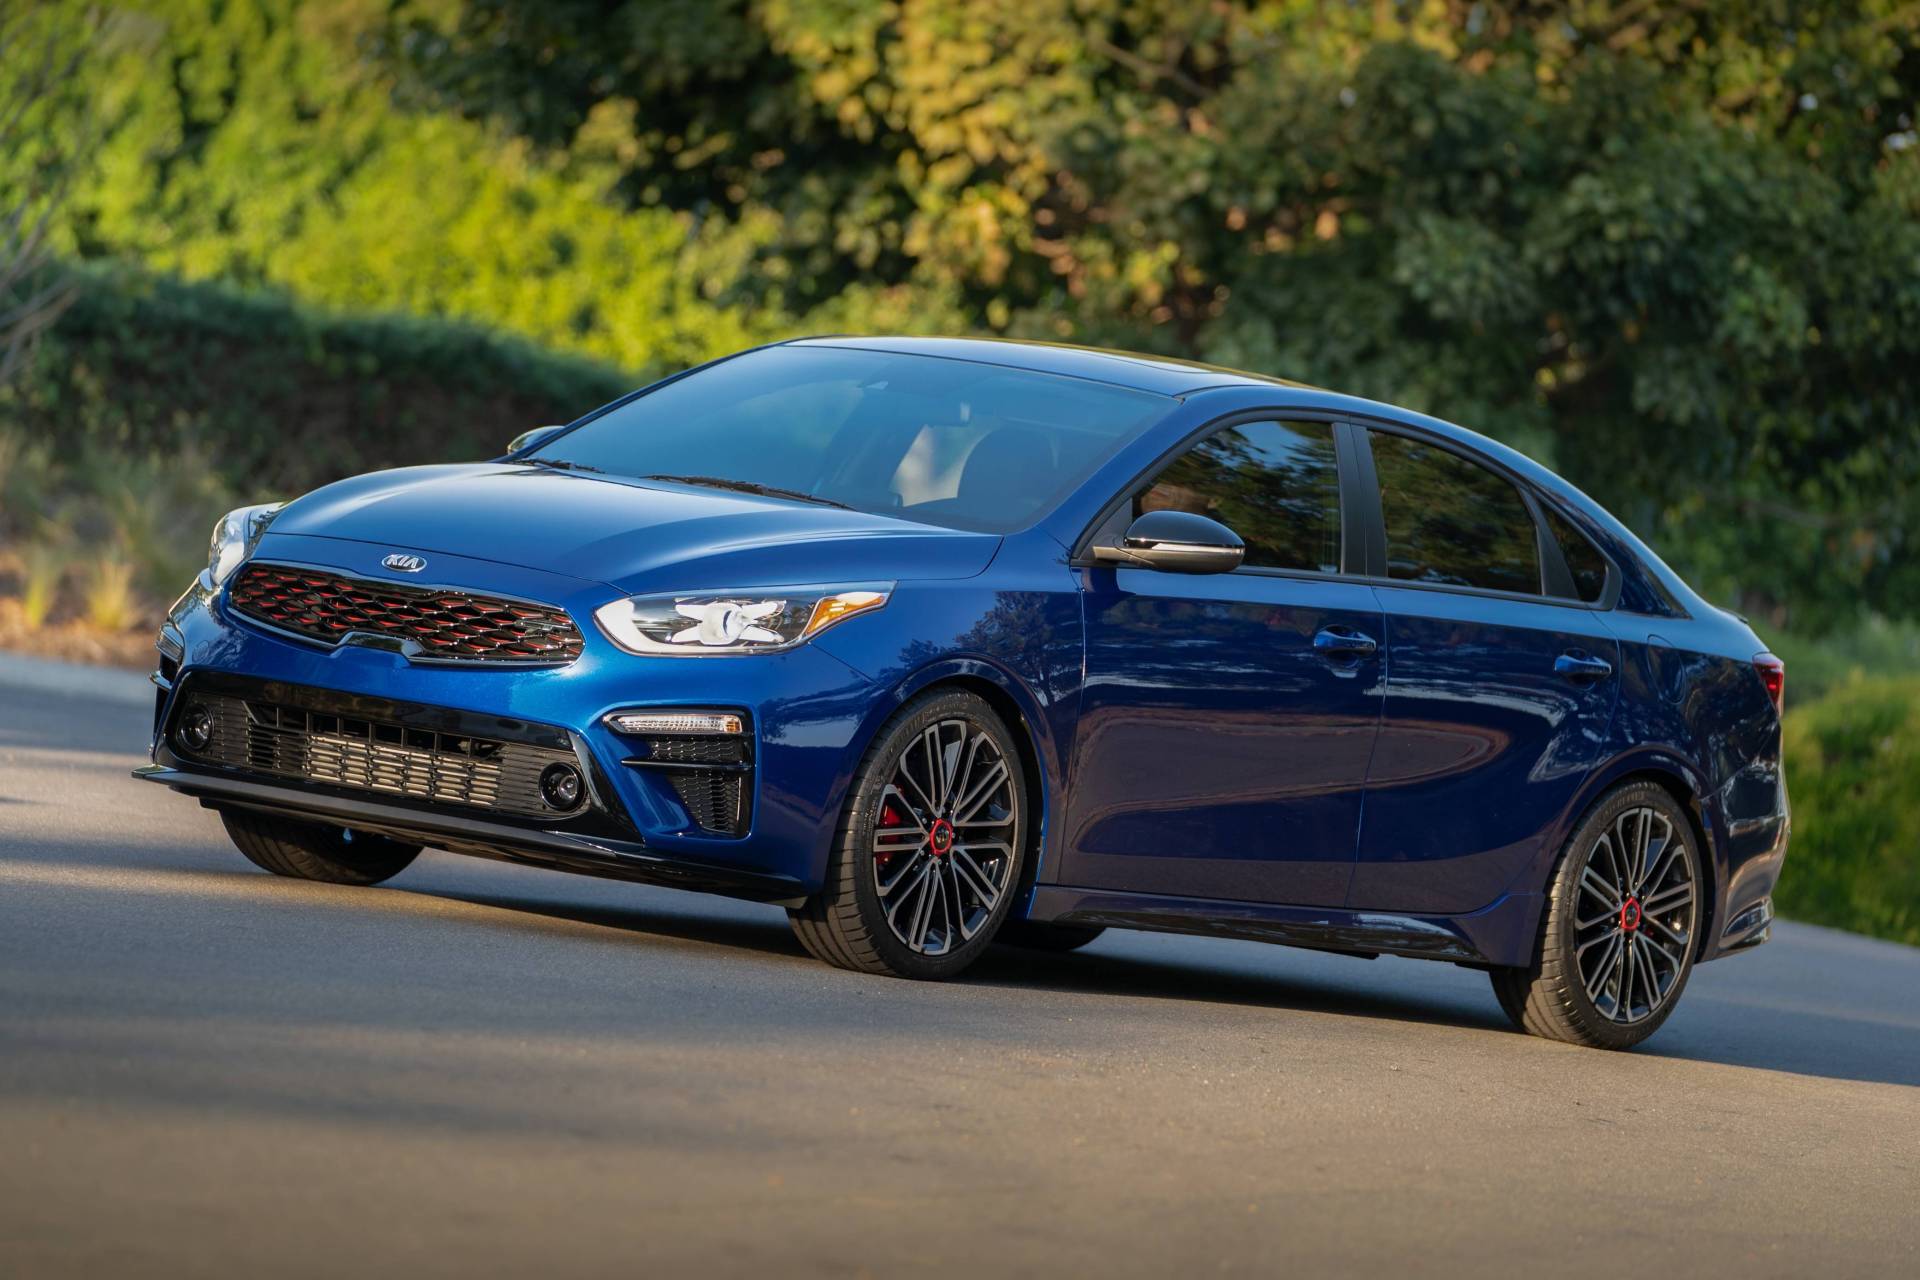 2020 Kia Forte GT Launched from $22,290 - autoevolution